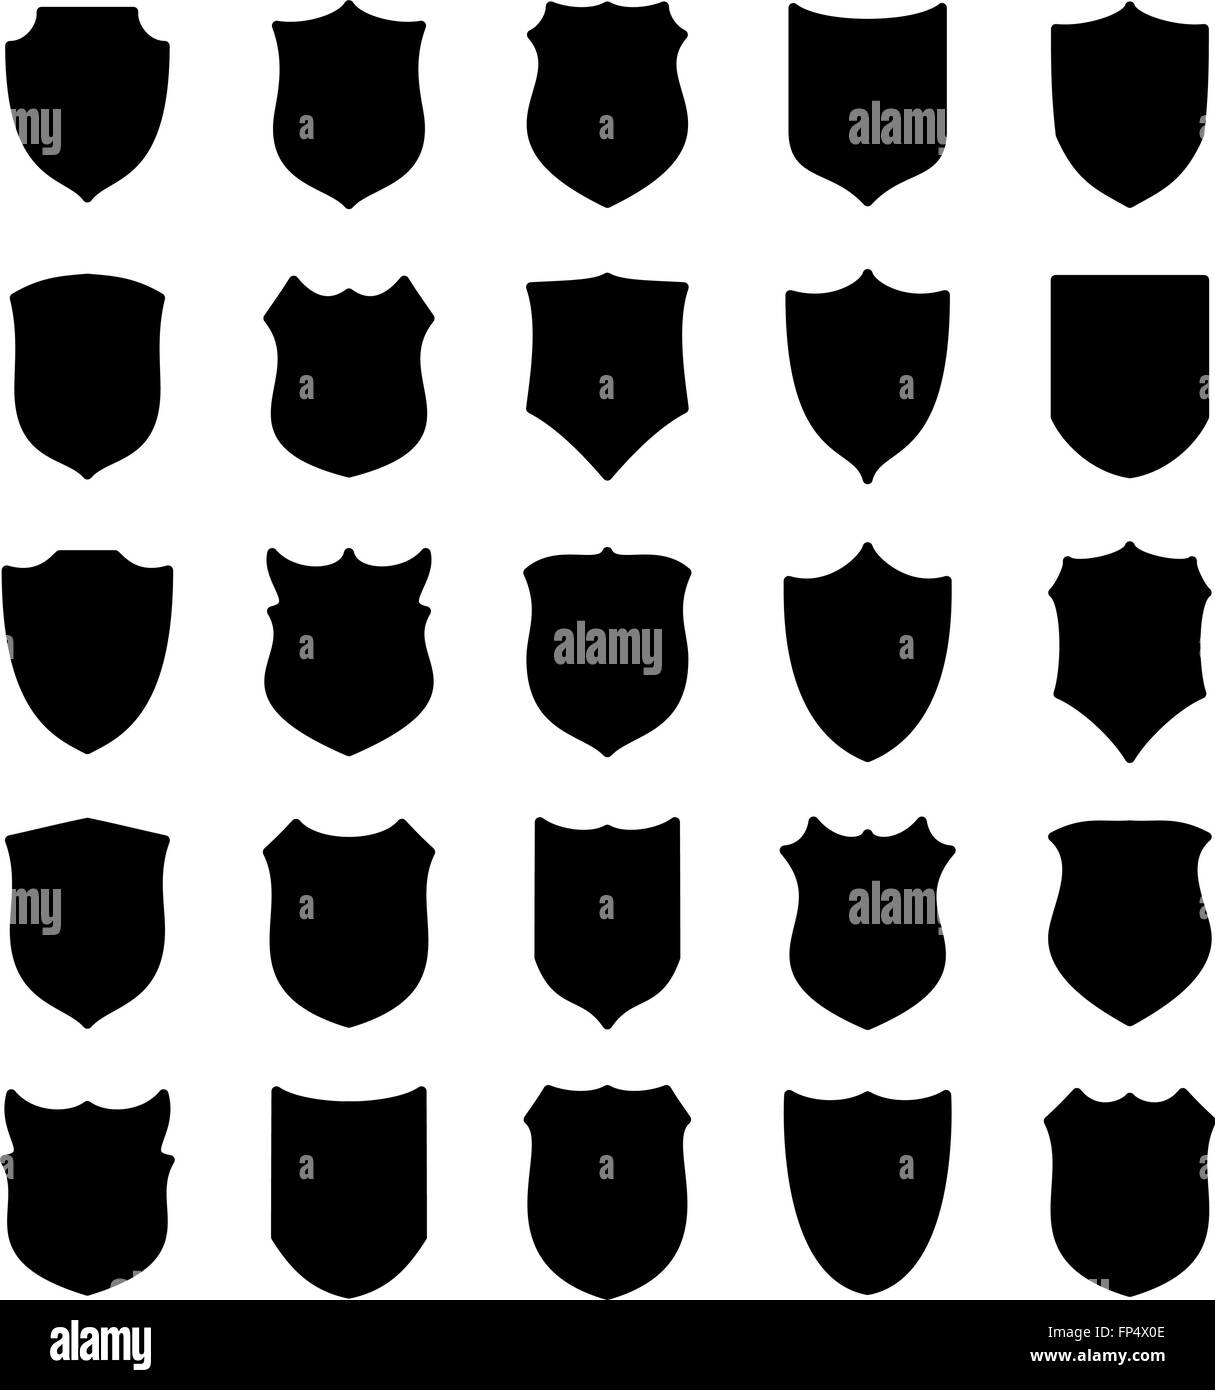 Large set of black shields silhouettes Stock Vector